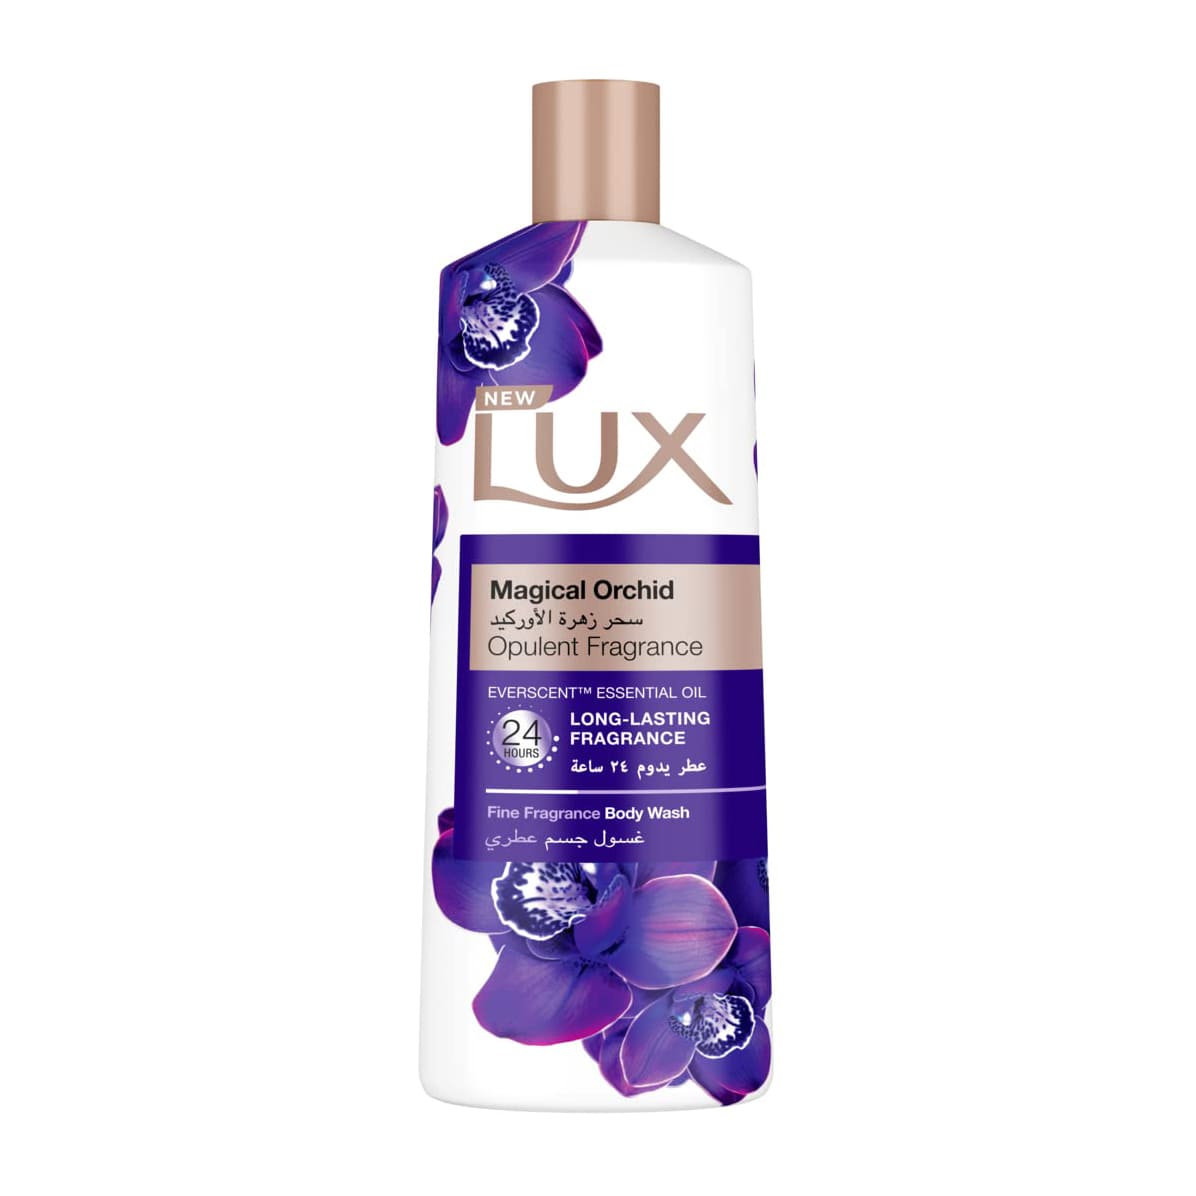 Lux Magical Orchid Opulent Fragrance Body Wash – 500ml - Bloom Pharmacy